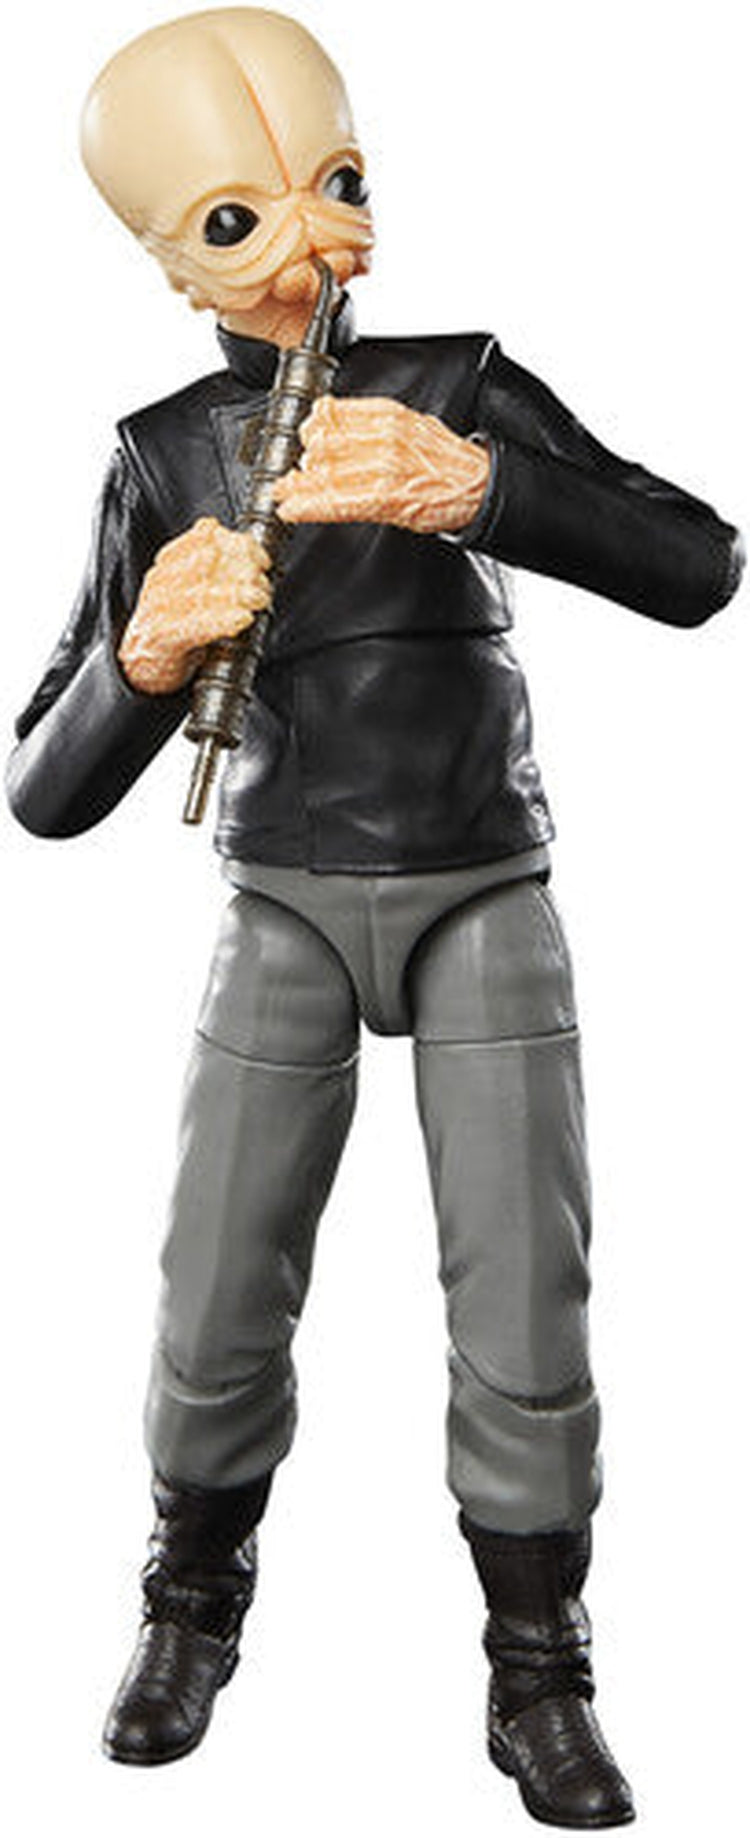 Hasbro Collectibles - Star Wars The Black Series Figrin D’an